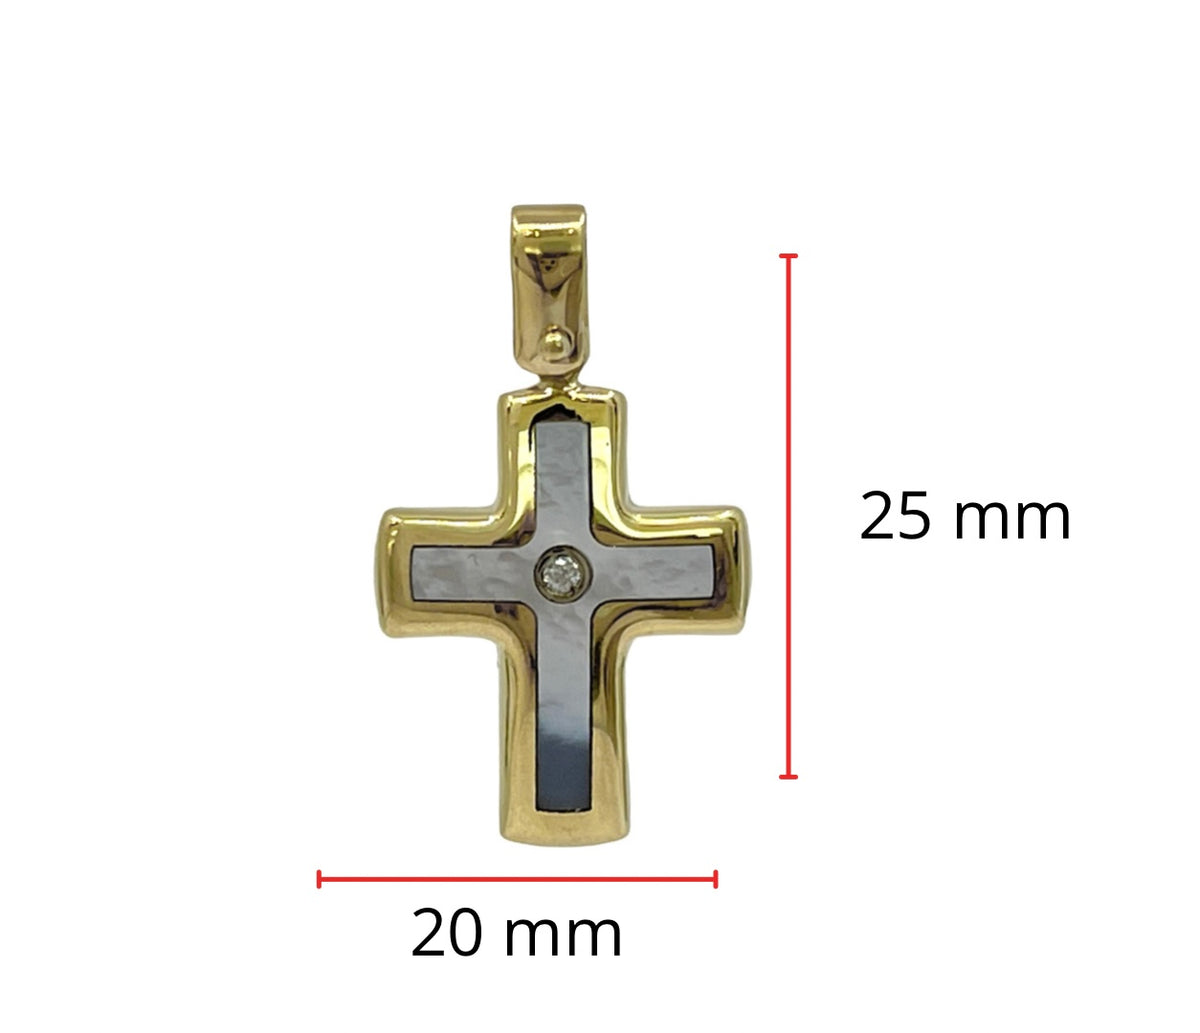 10K Yellow Gold Mother of Pearl and Cubic Zirconia Cross Charm